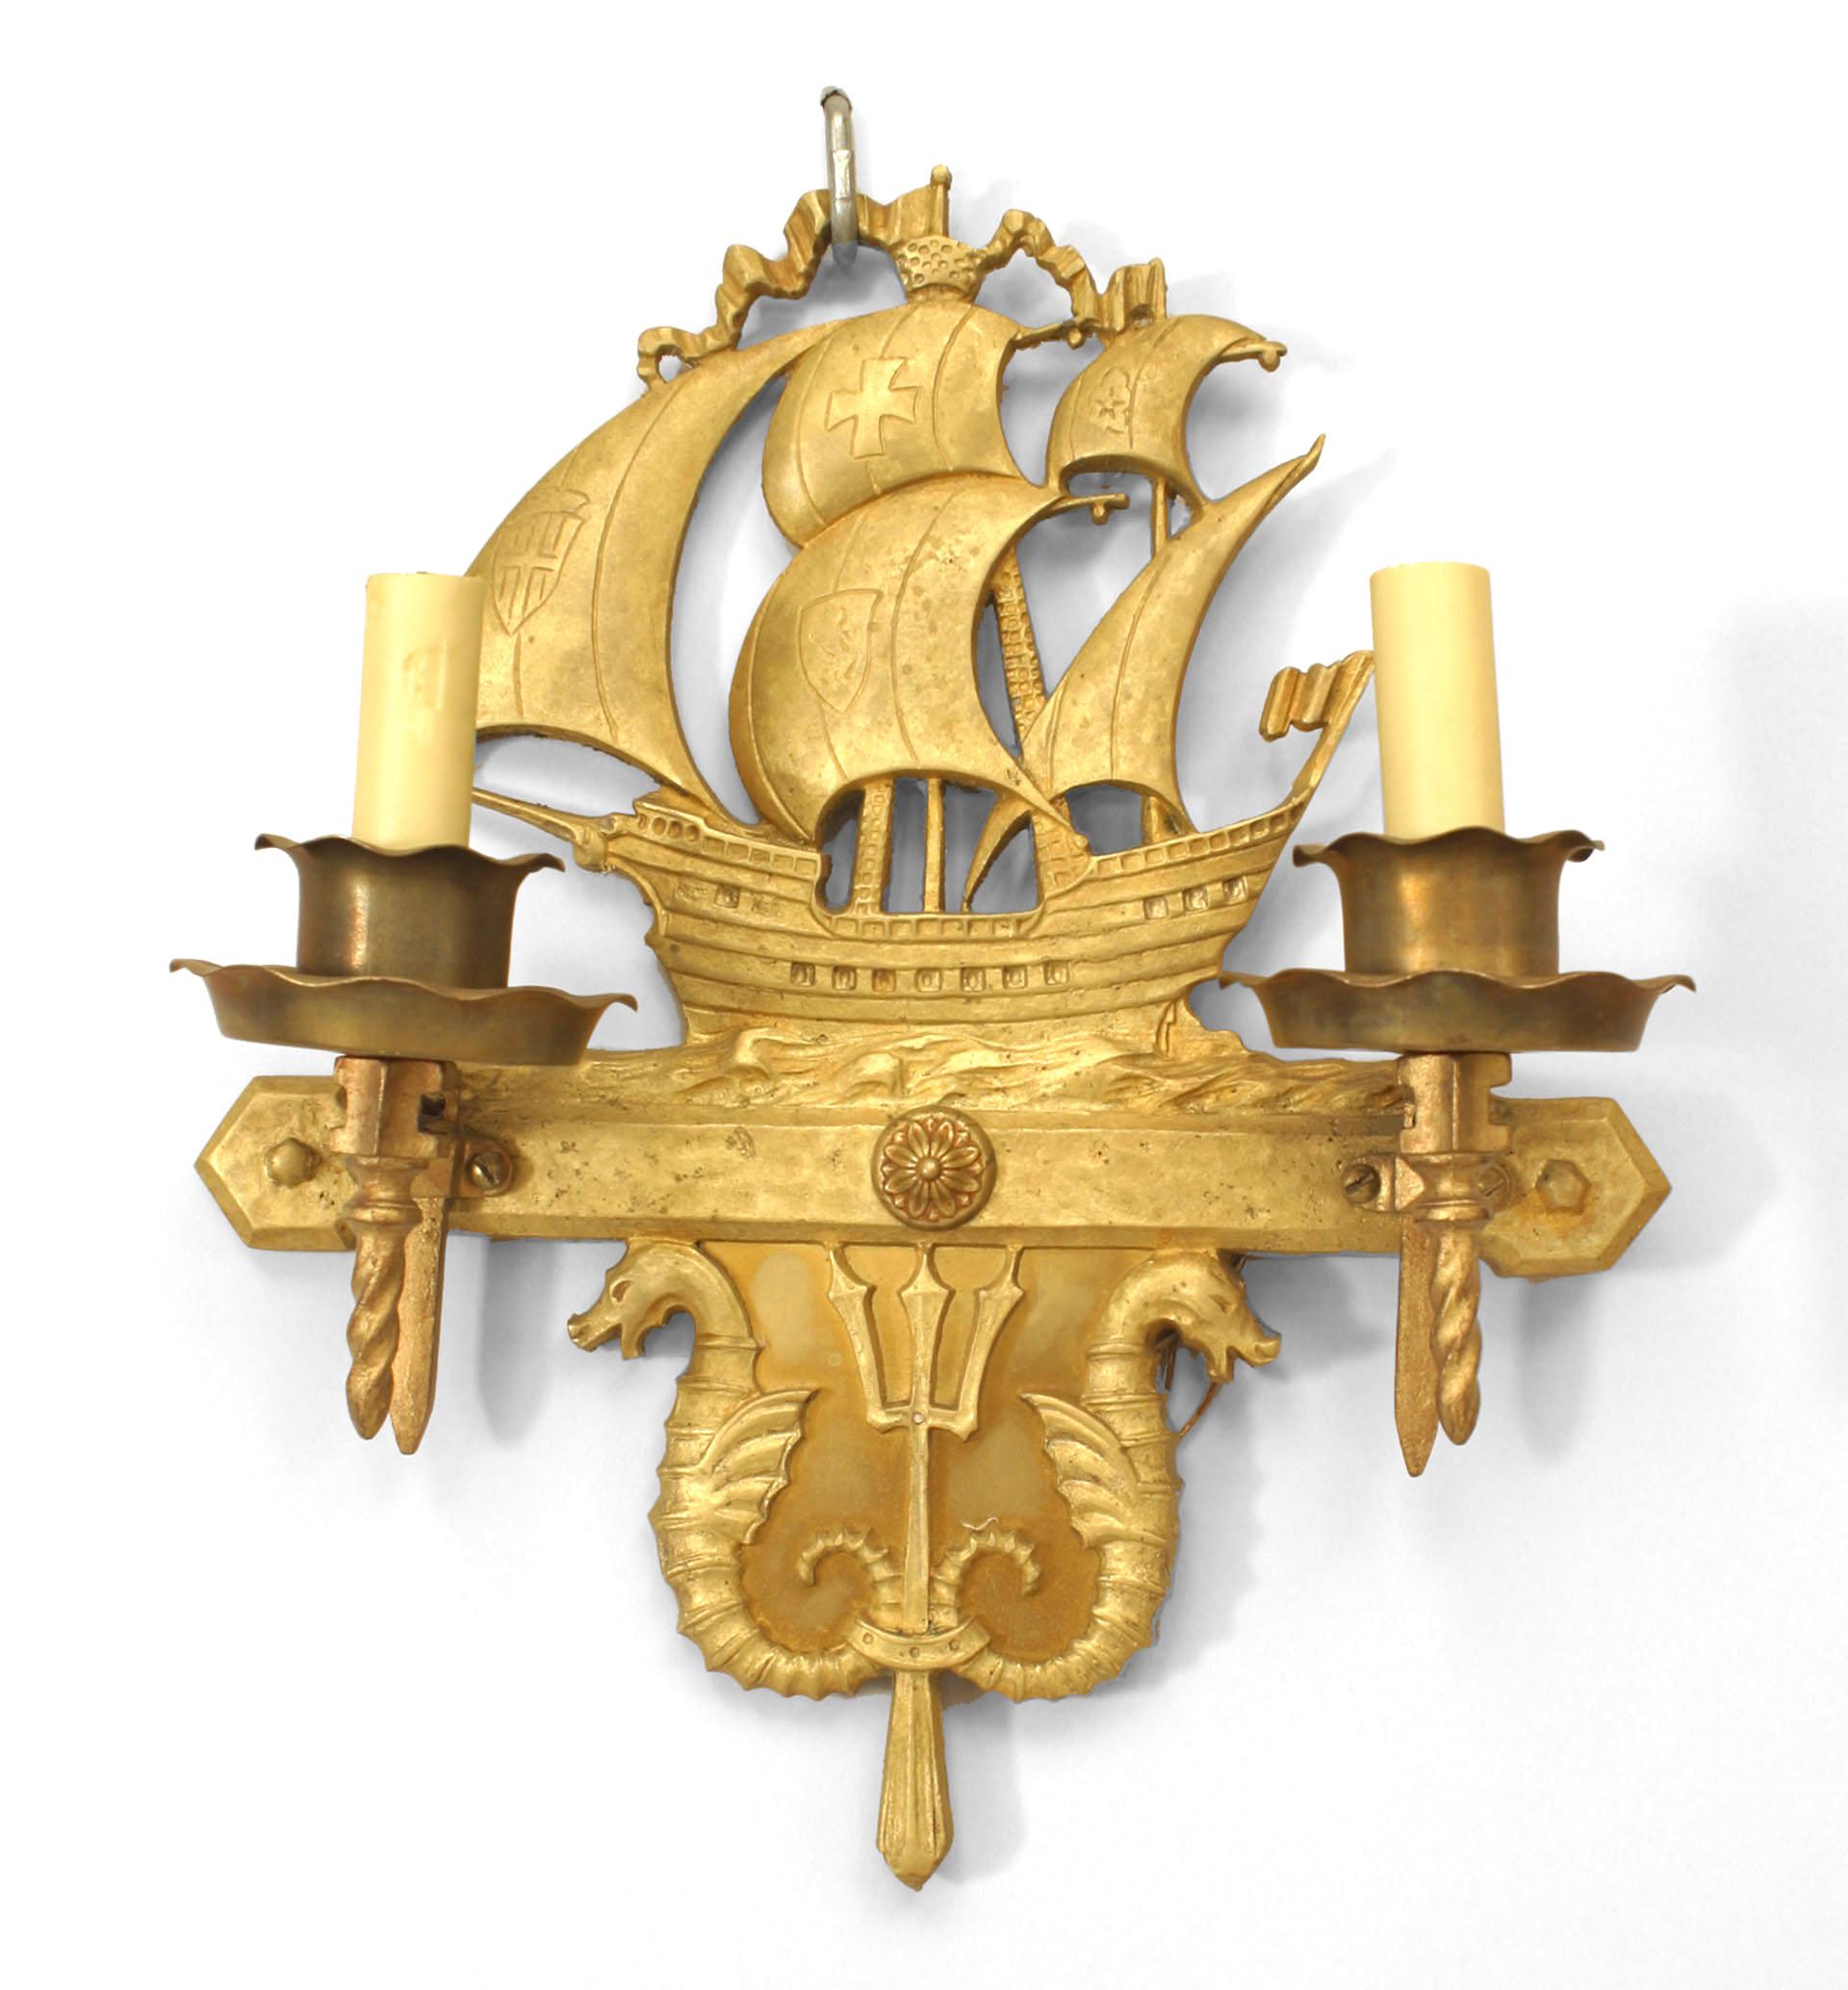 Pair of American Victorian-style (2nd quarter 20th Century) bronze wall sconces with two arms and a nautical motif backplate of ships with sails above two sea horses and a trident. (PRICED AS Pair)
